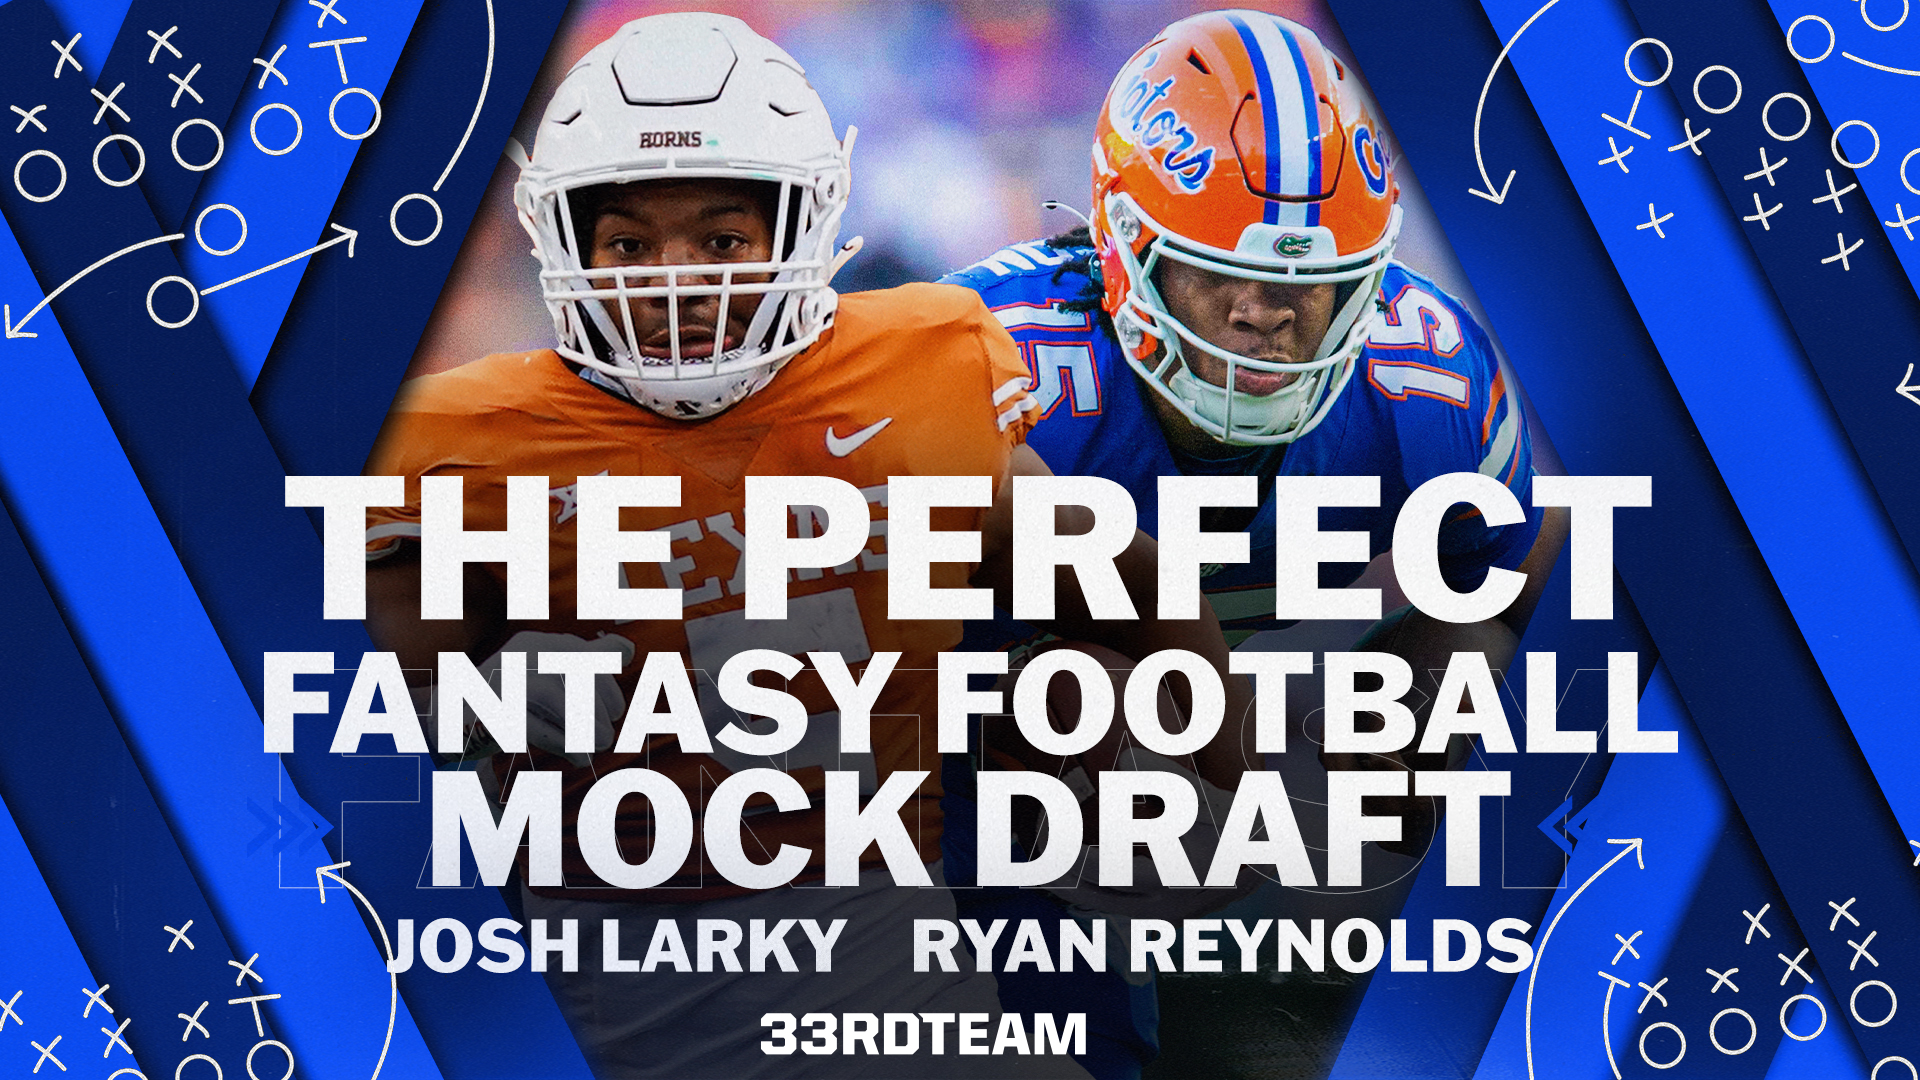 The Perfect Fantasy Football Draft from 2022